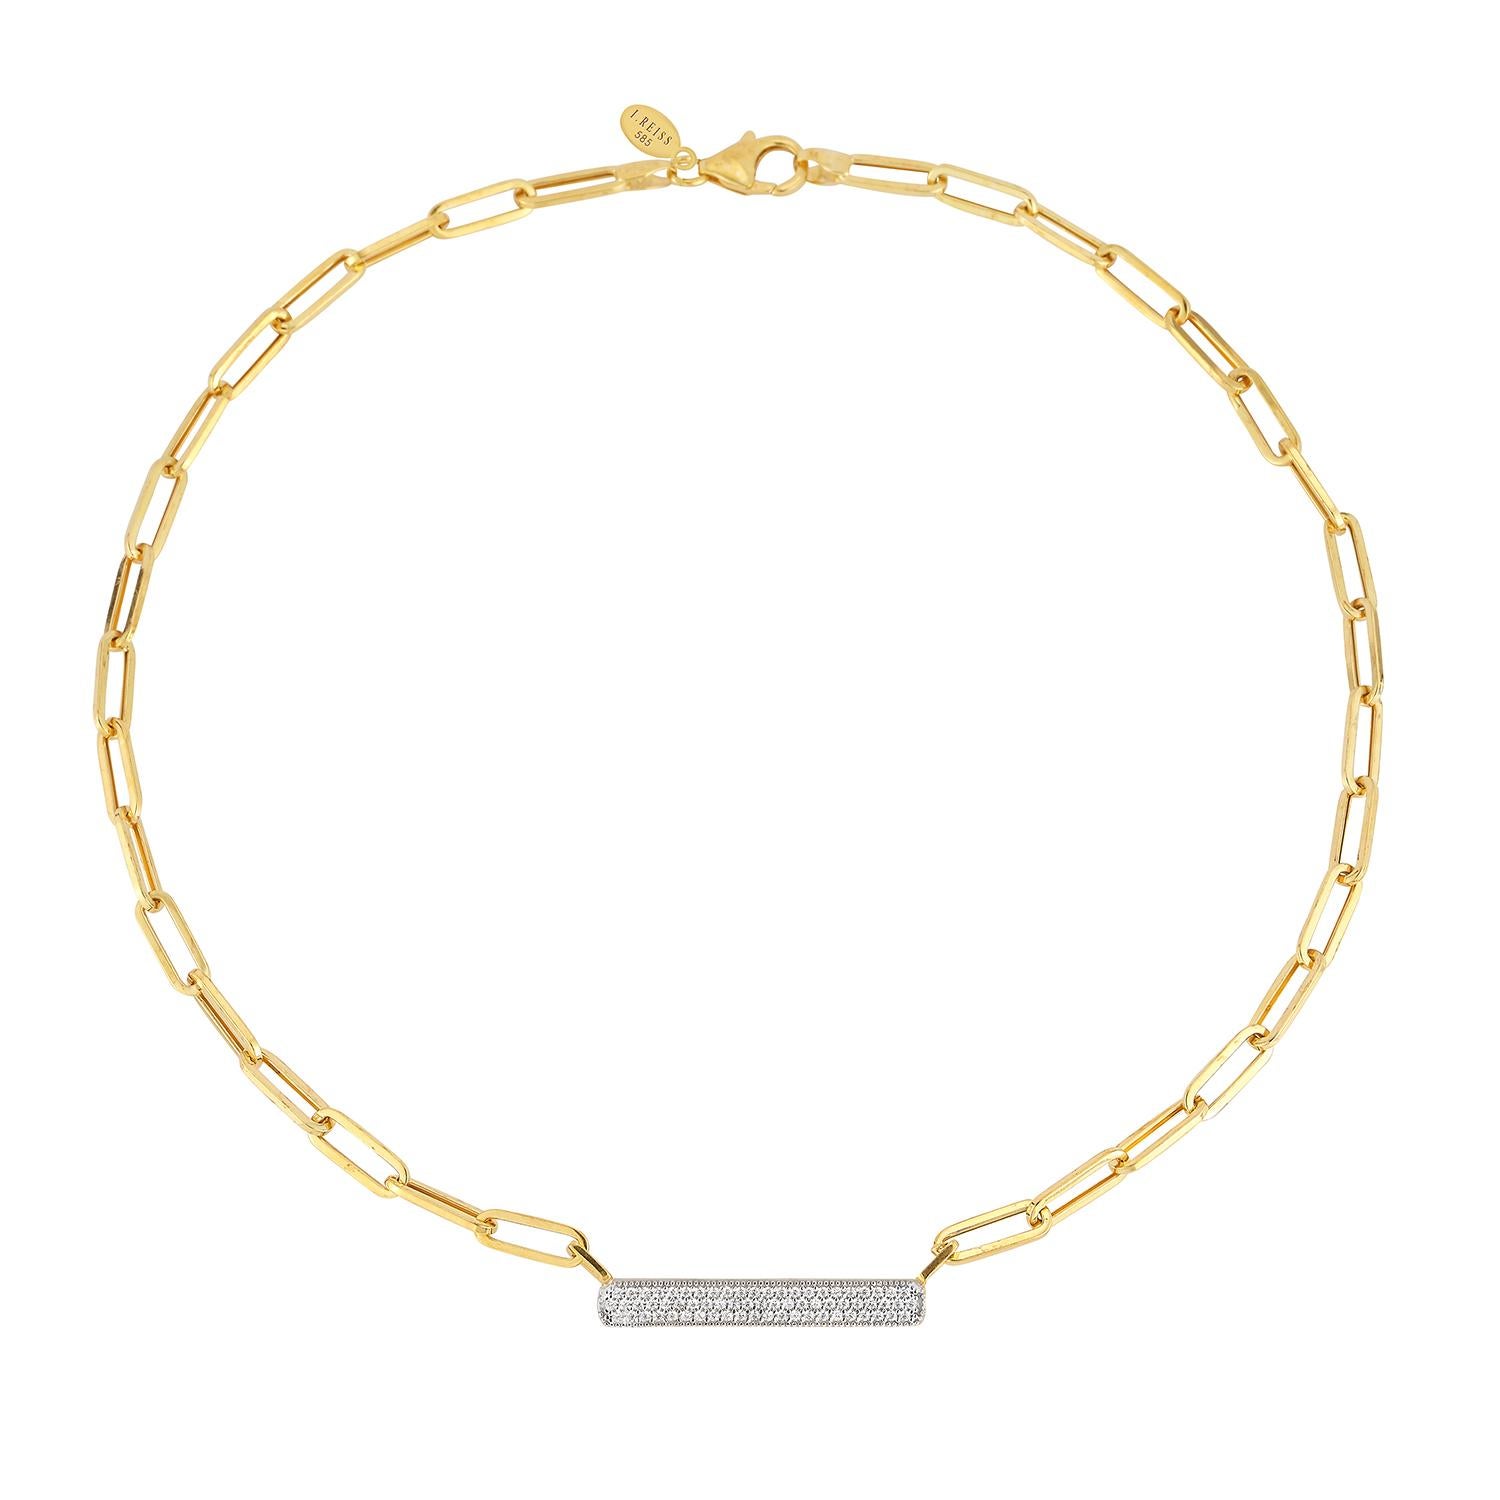 14 Karat Yellow Gold Hand-Crafted Polish-Finished Open Link Necklace, Enhanced  with 0.40 Carats of a Pave Set  Diamond ID Bar Set with a Lobster-Claw Clasp.
